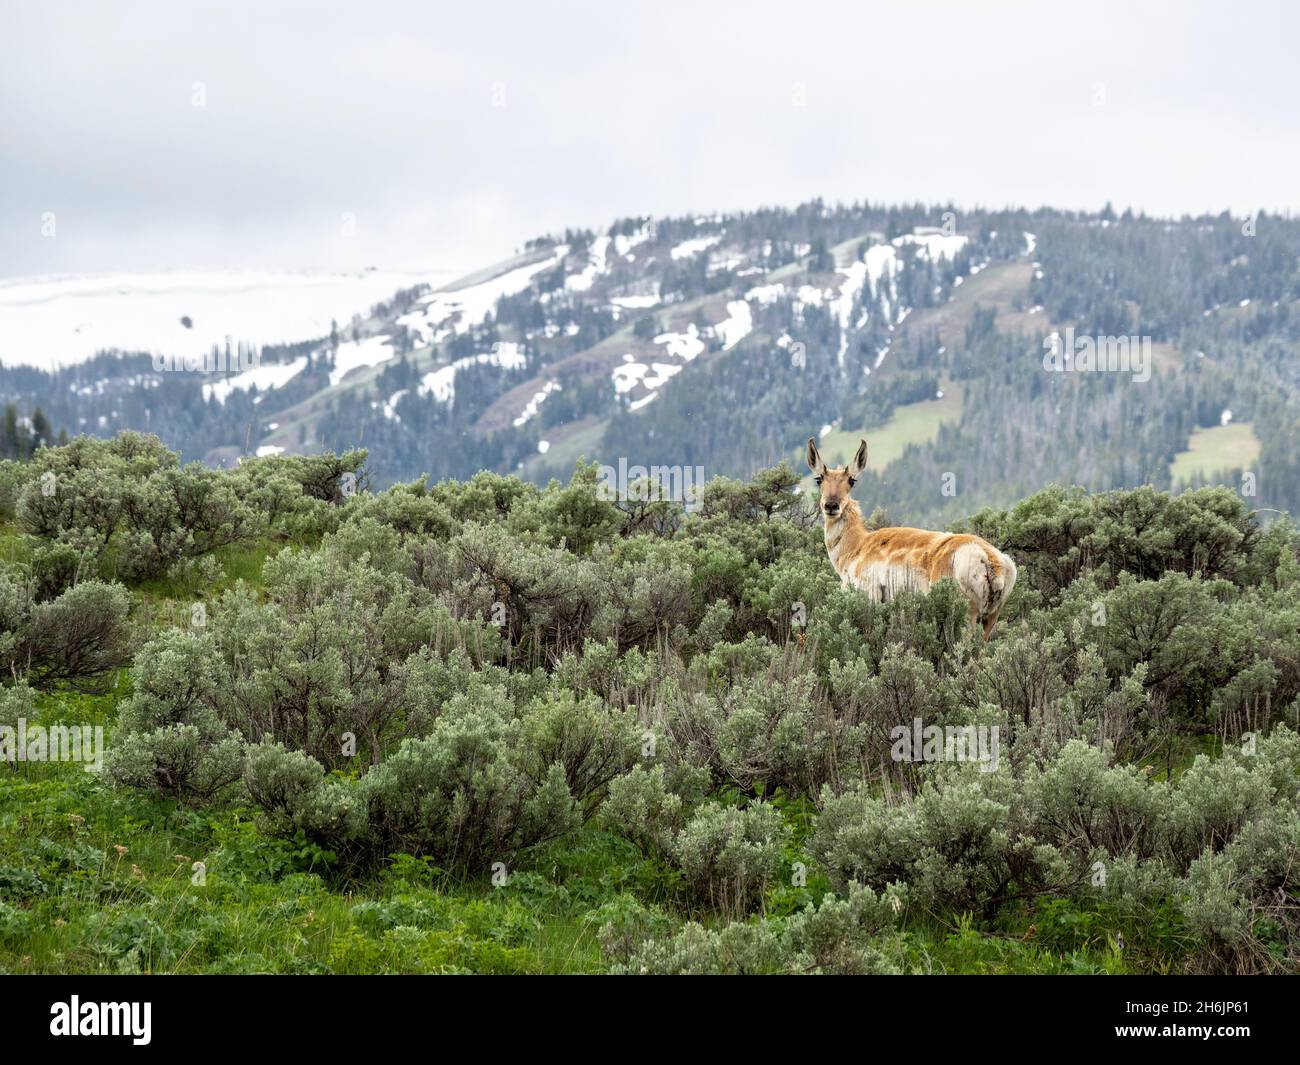 An adult pronghorn (Antilocapra americana, in sagebrush in Yellowstone National Park, UNESCO World Heritage Site, Wyoming, United States of America Stock Photo